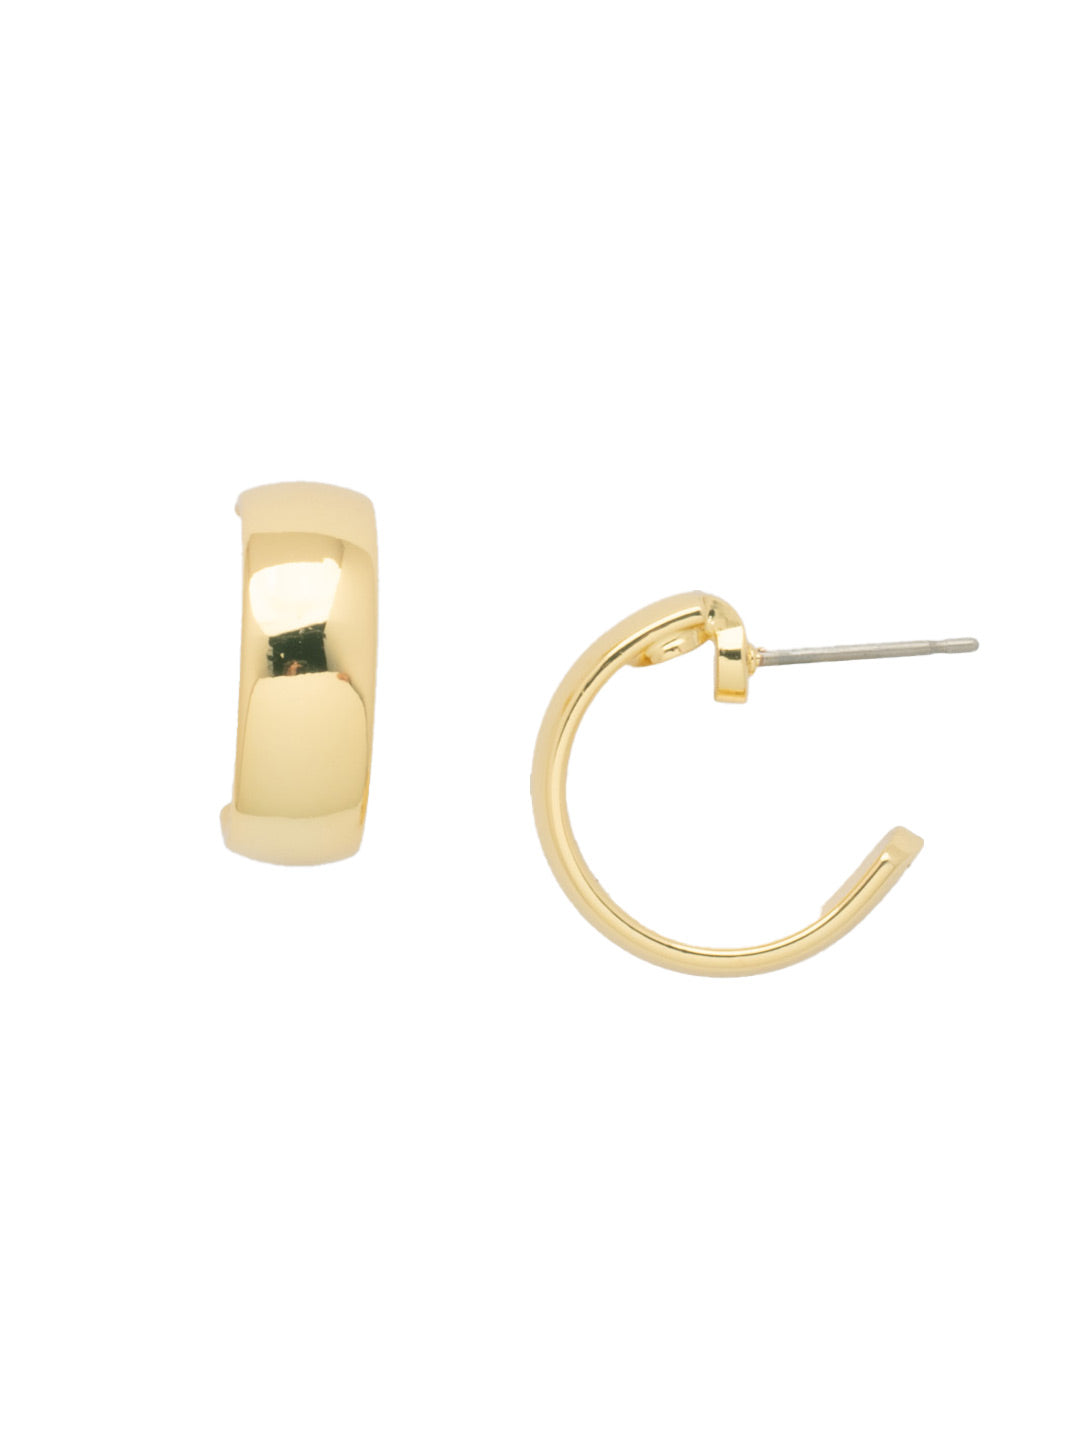 Bradi Hoop Earrings - EFM24BGMTL - <p>The Bradi Hoop Earrings feature a rounded domed hoop on a post. From Sorrelli's Bare Metallic collection in our Bright Gold-tone finish.</p>